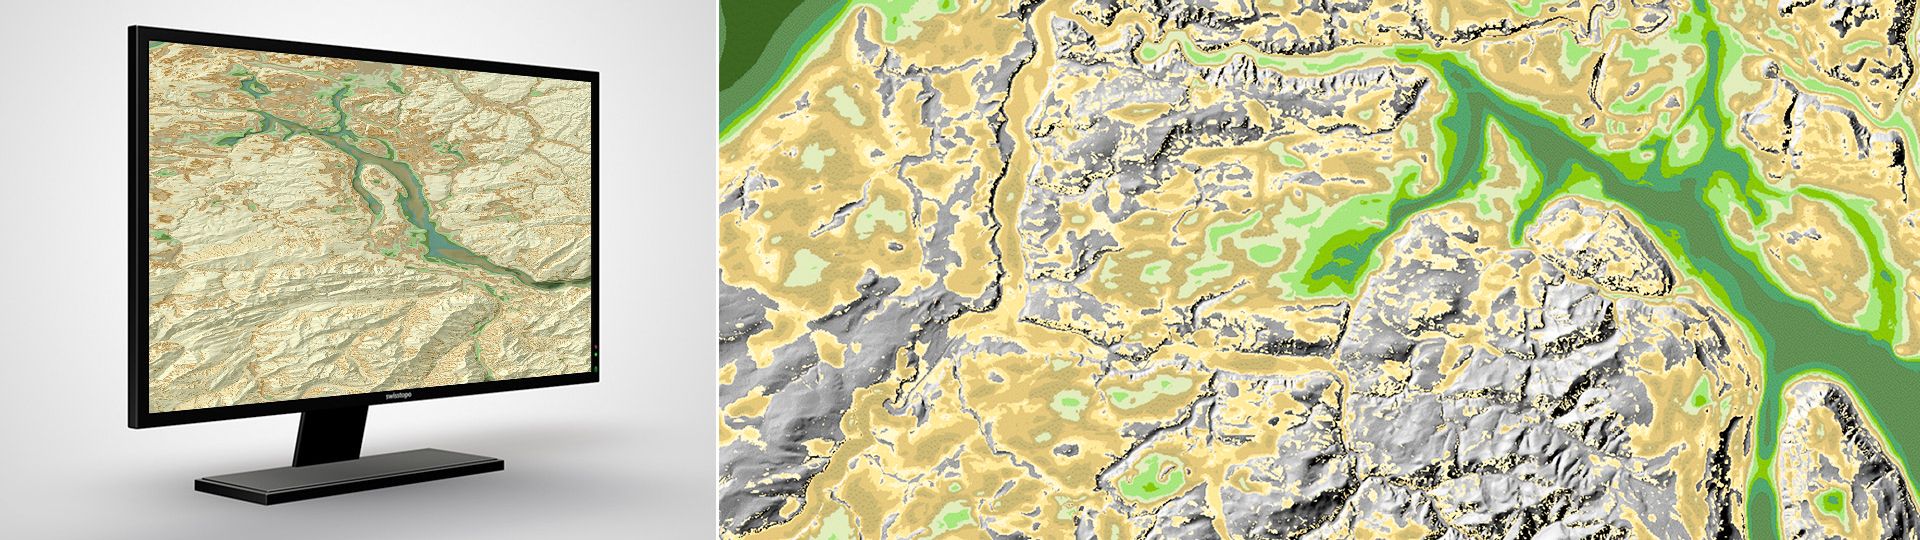 Thickness model of unconsolidated deposits: the digital thickness model of unconsolidated deposits in the Molasse Basin and the larger Alpine valleys